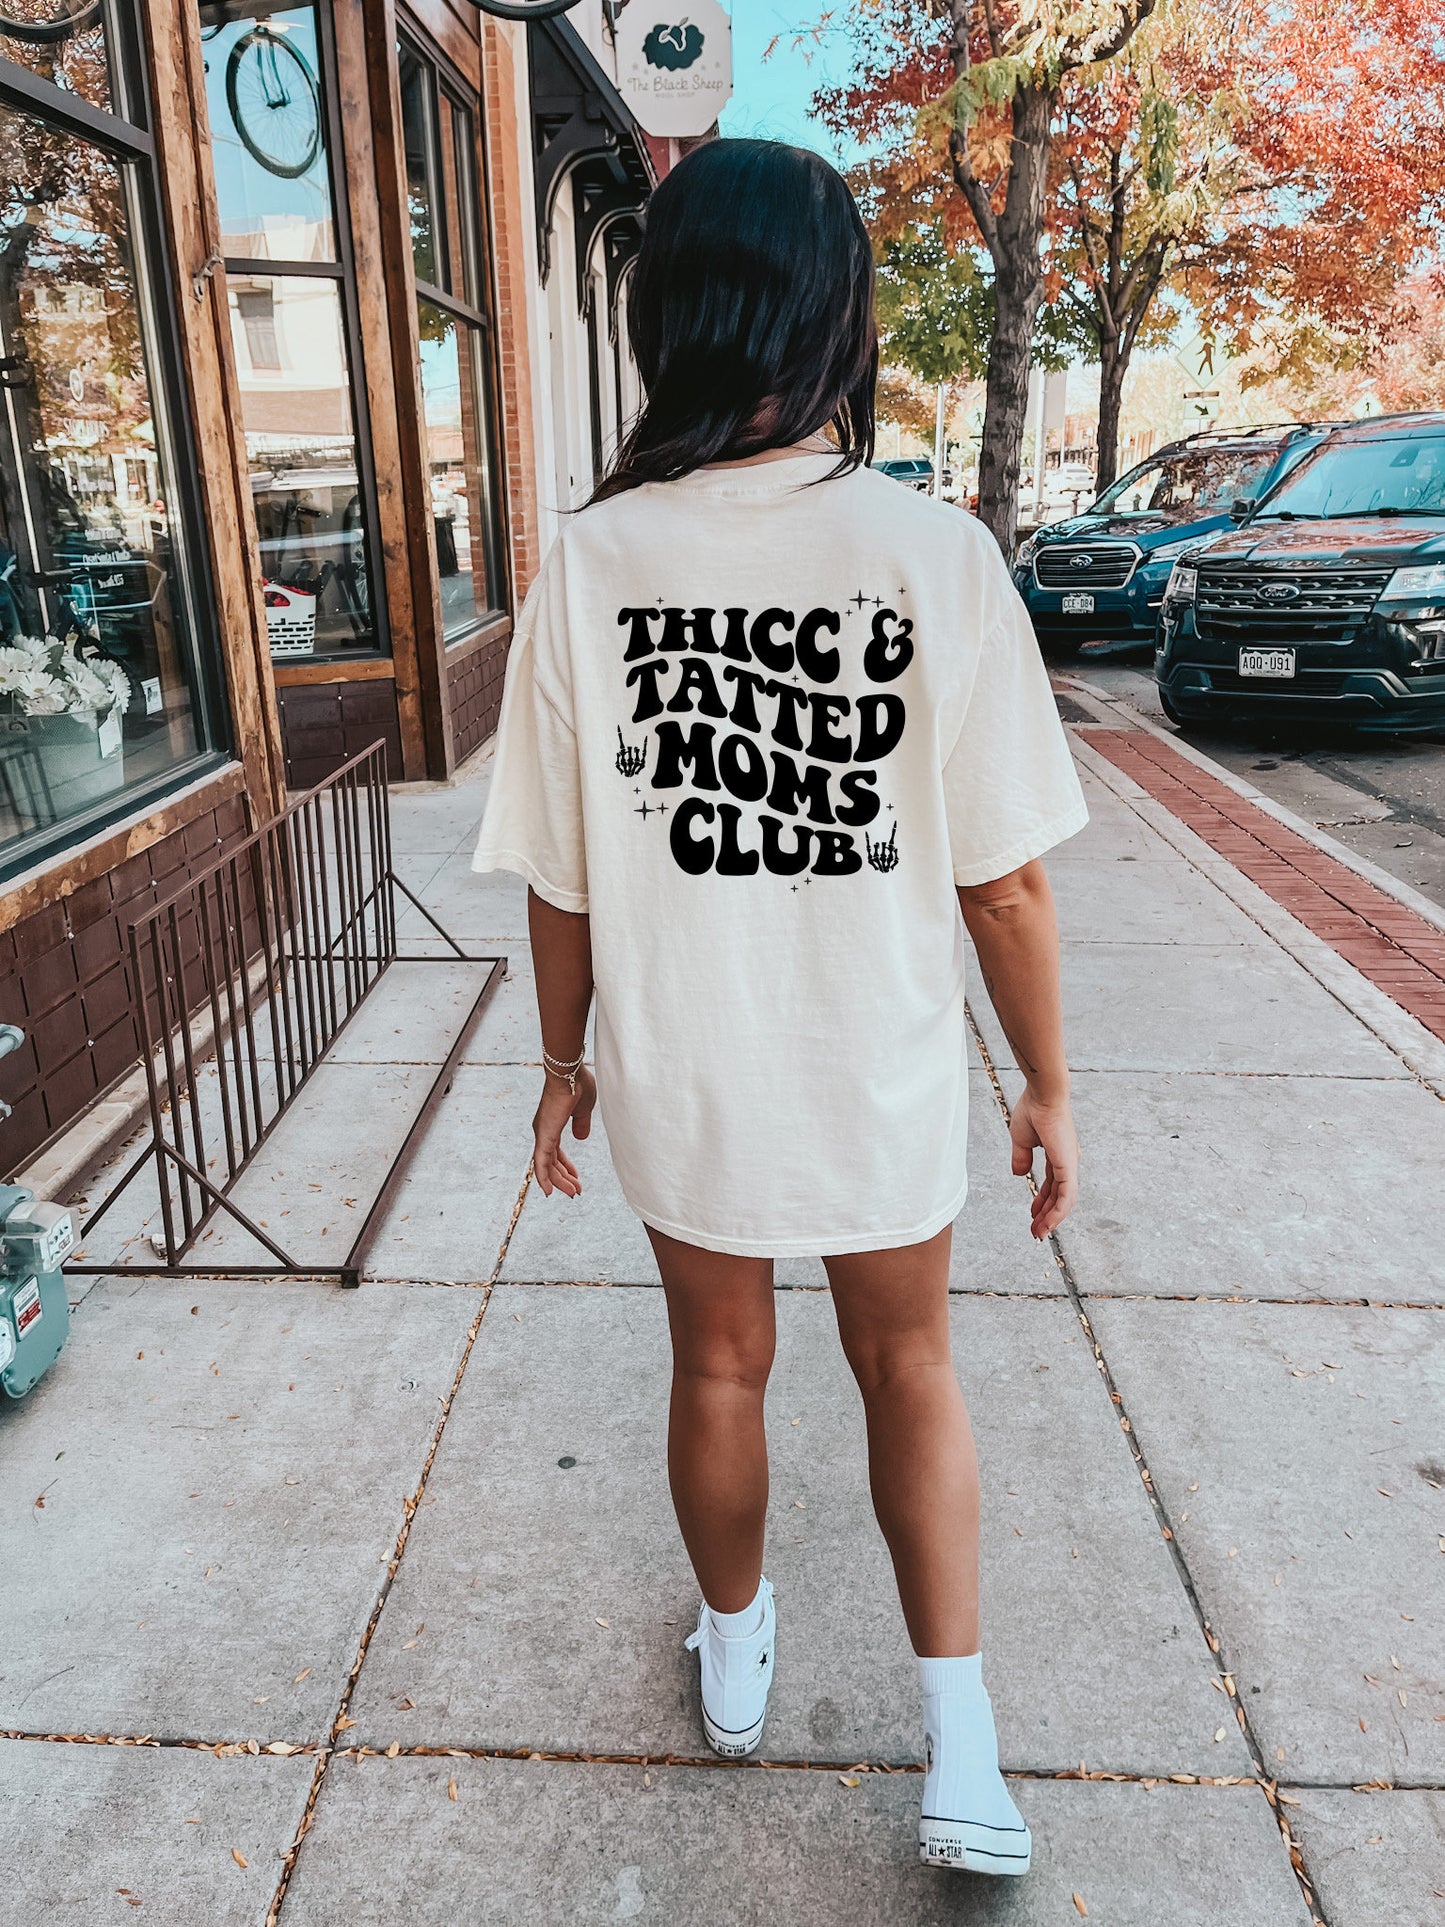 Thicc and tatted moms,  tattoos, thick mama,  thick moms club, tattoo graphic tee, Oversized tee